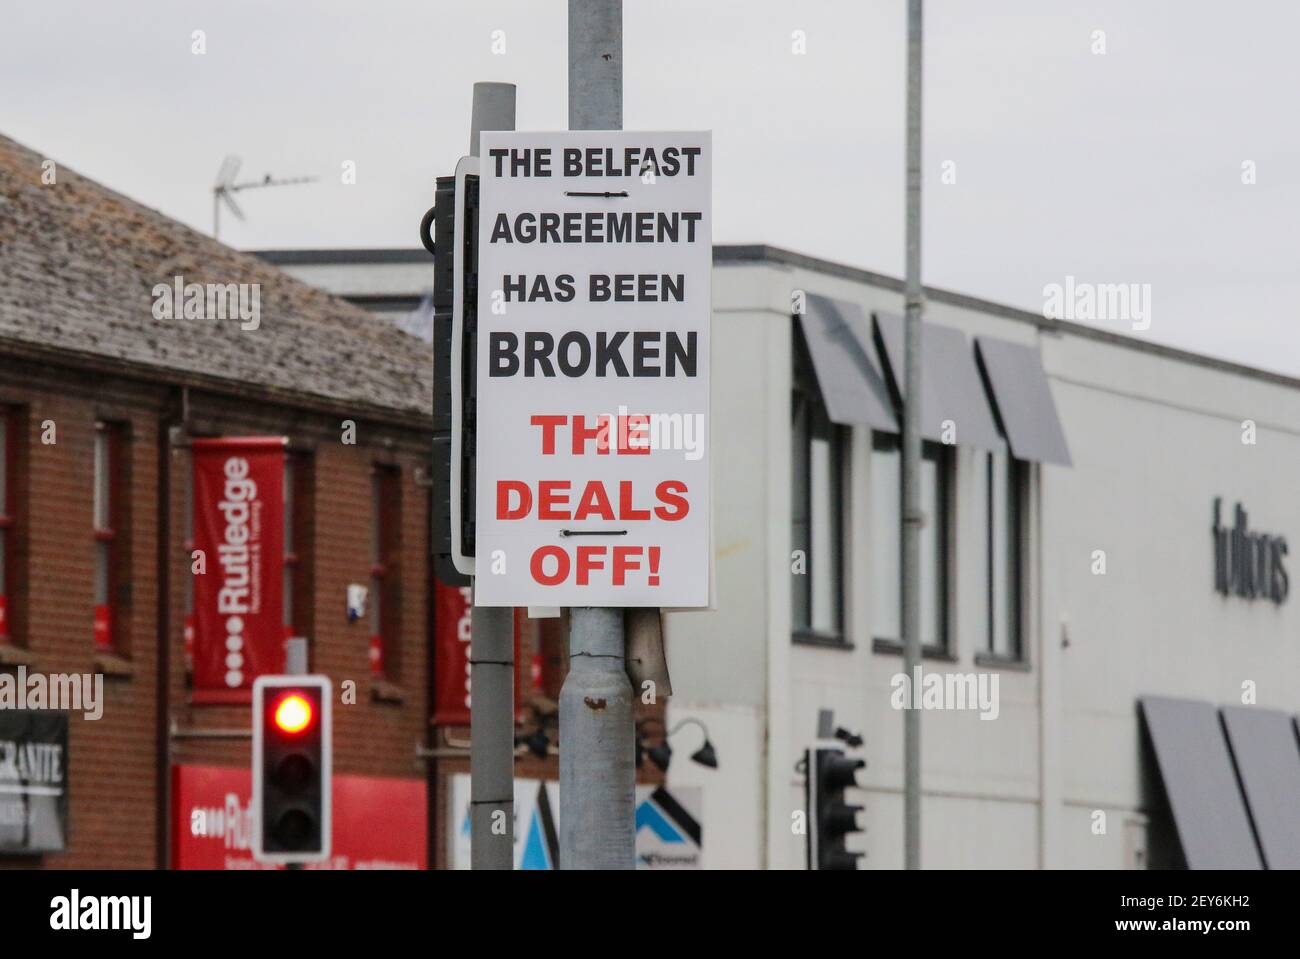 Unionist Loyalist opposition message to Northern Ireland protocol post-Brexit on loyalist placard in Northern Ireland March 2021. Stock Photo